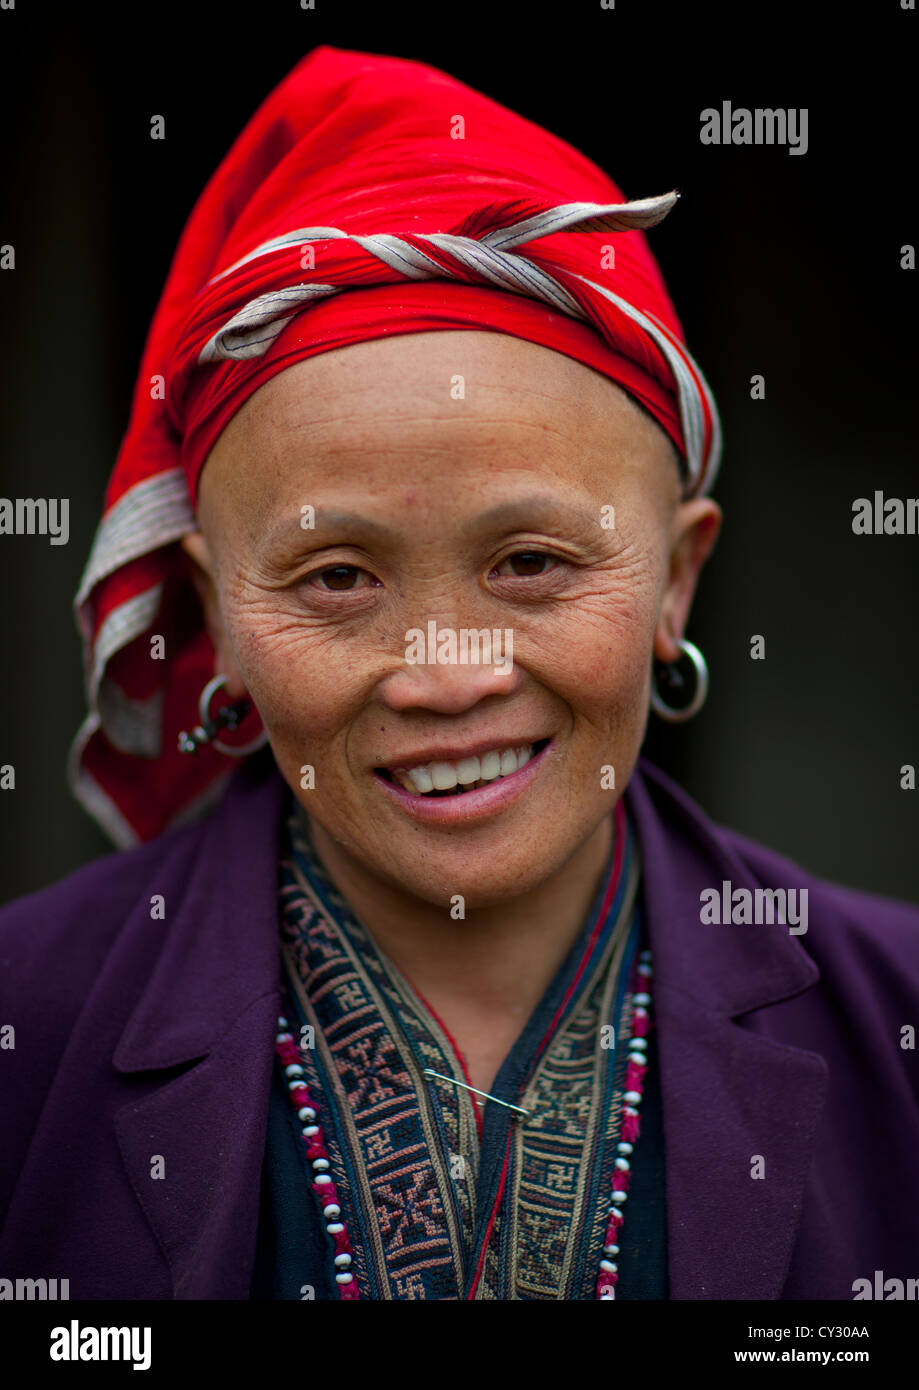 Old Red Dzao Woman With A Red Headscarf, Sapa, Vietnam Stock Photo